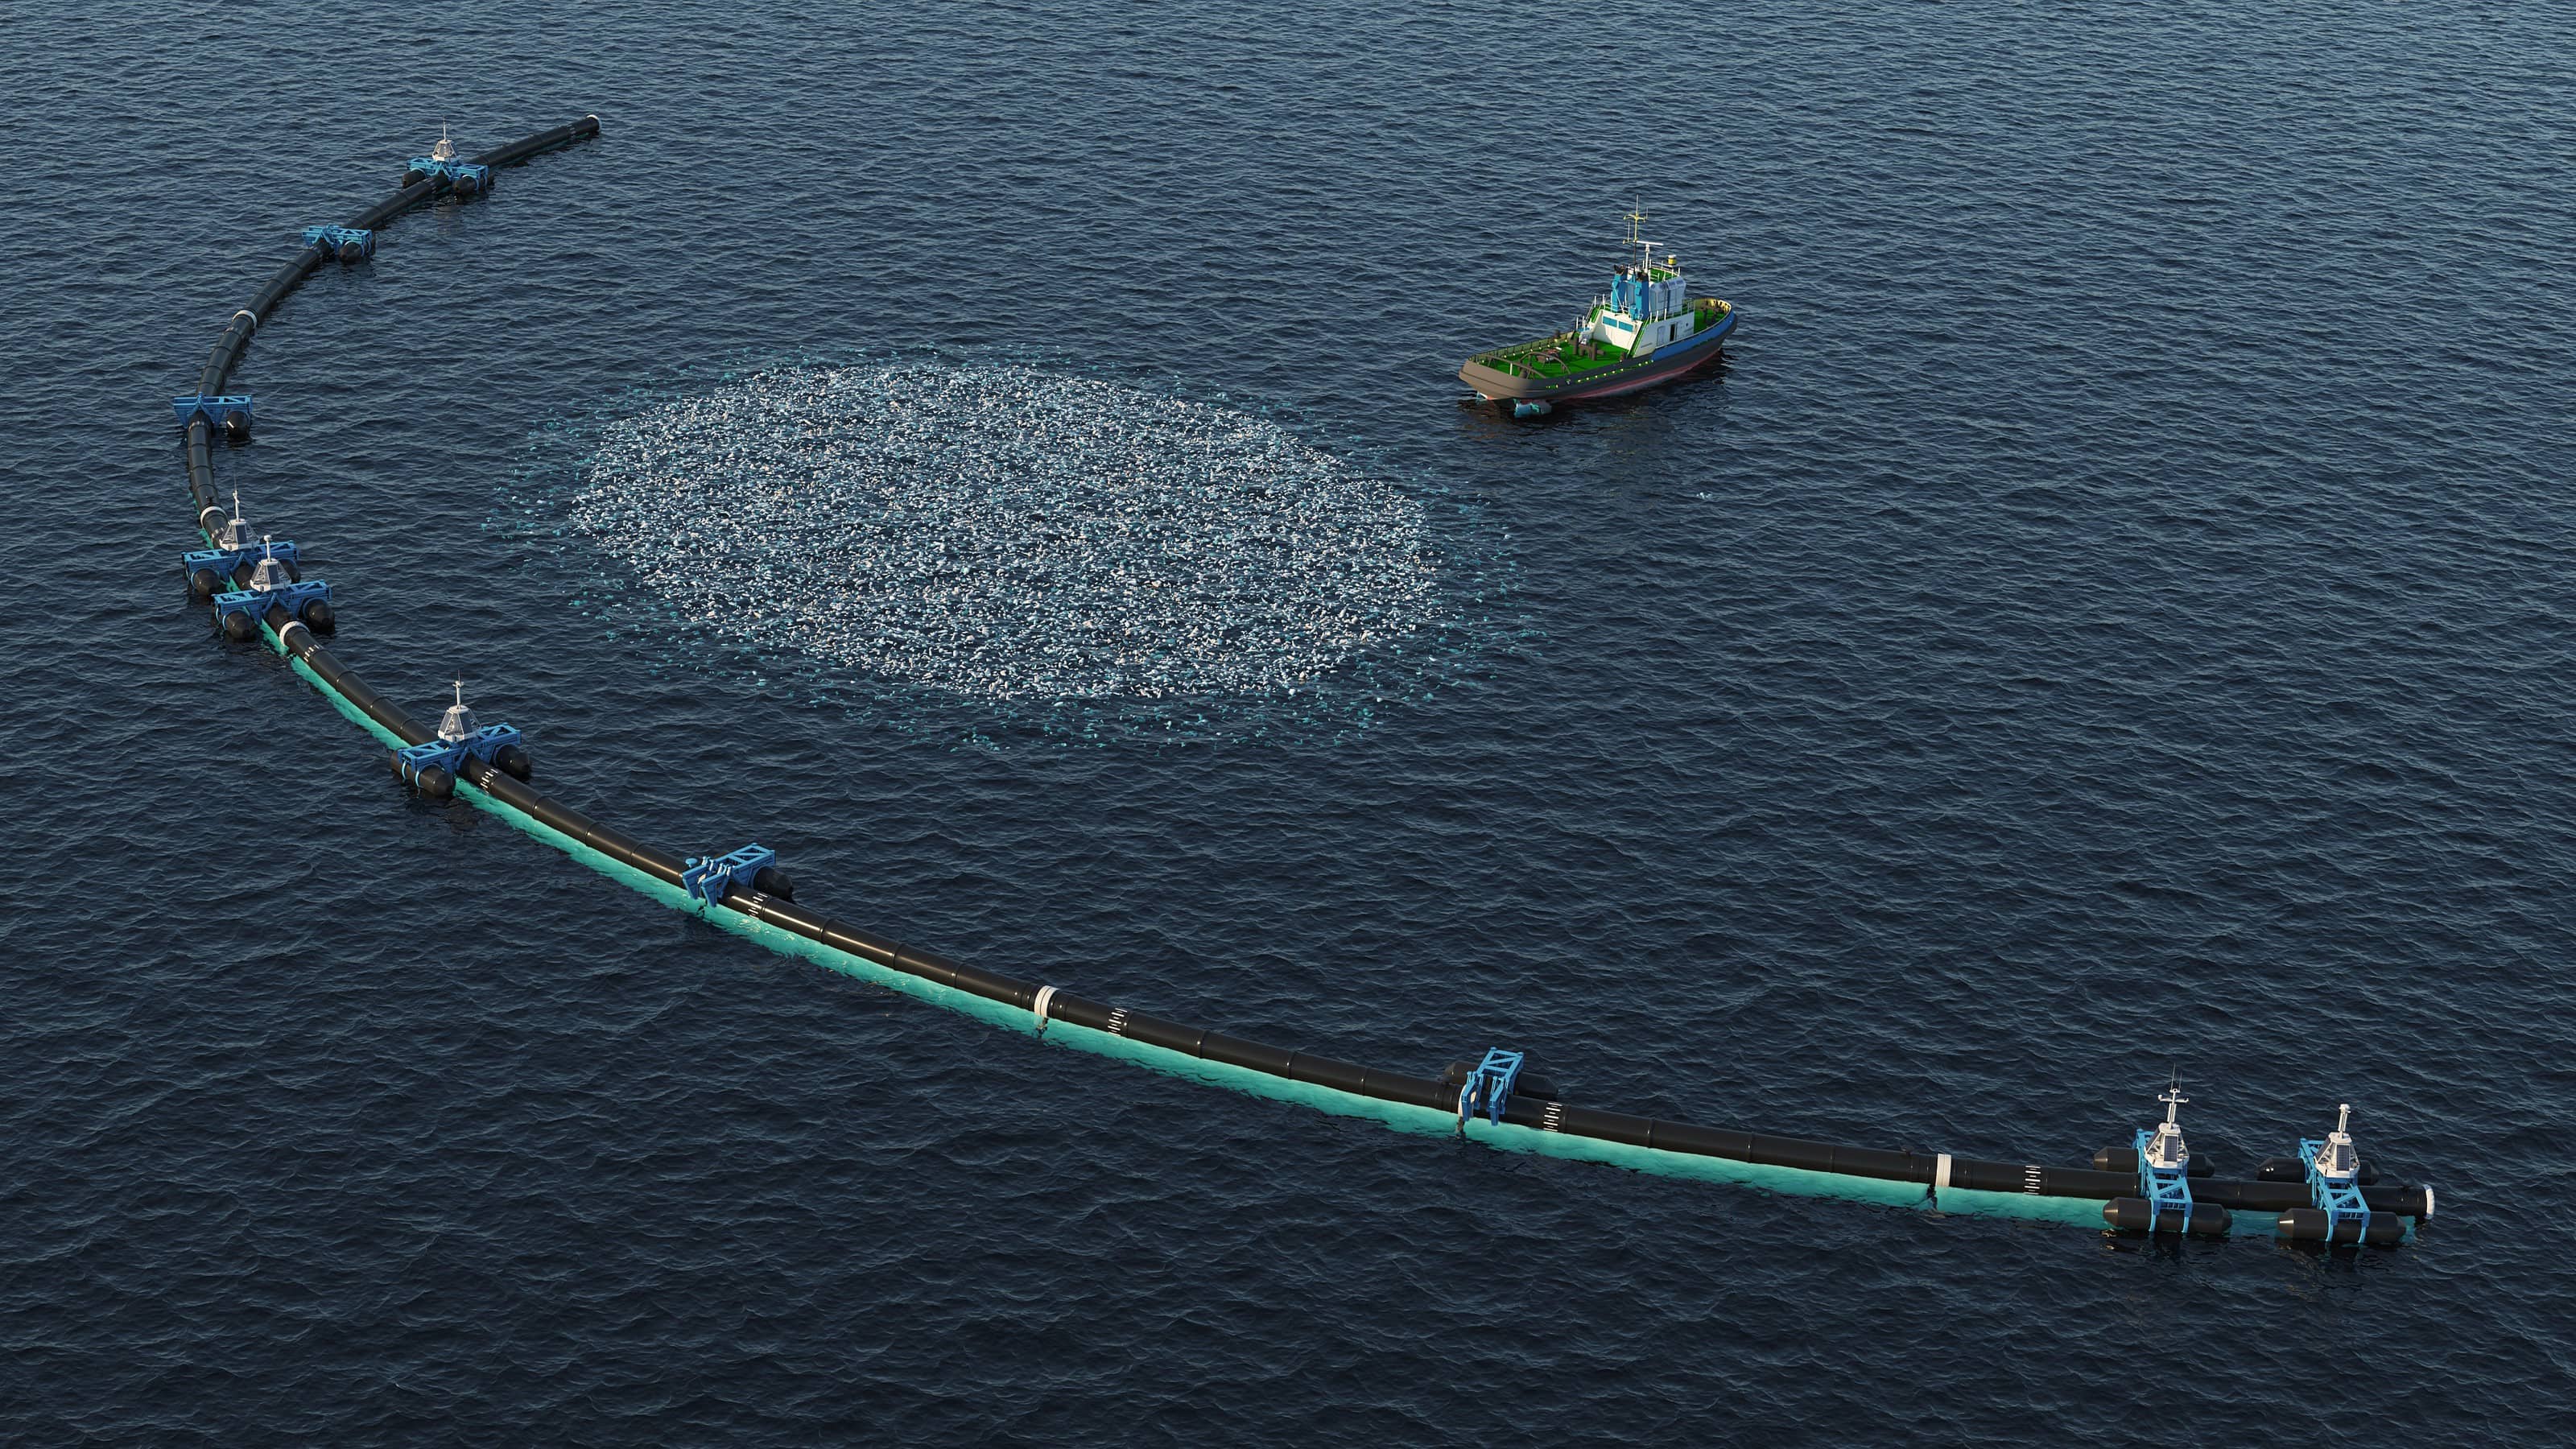 North Pacific Garbage Patch